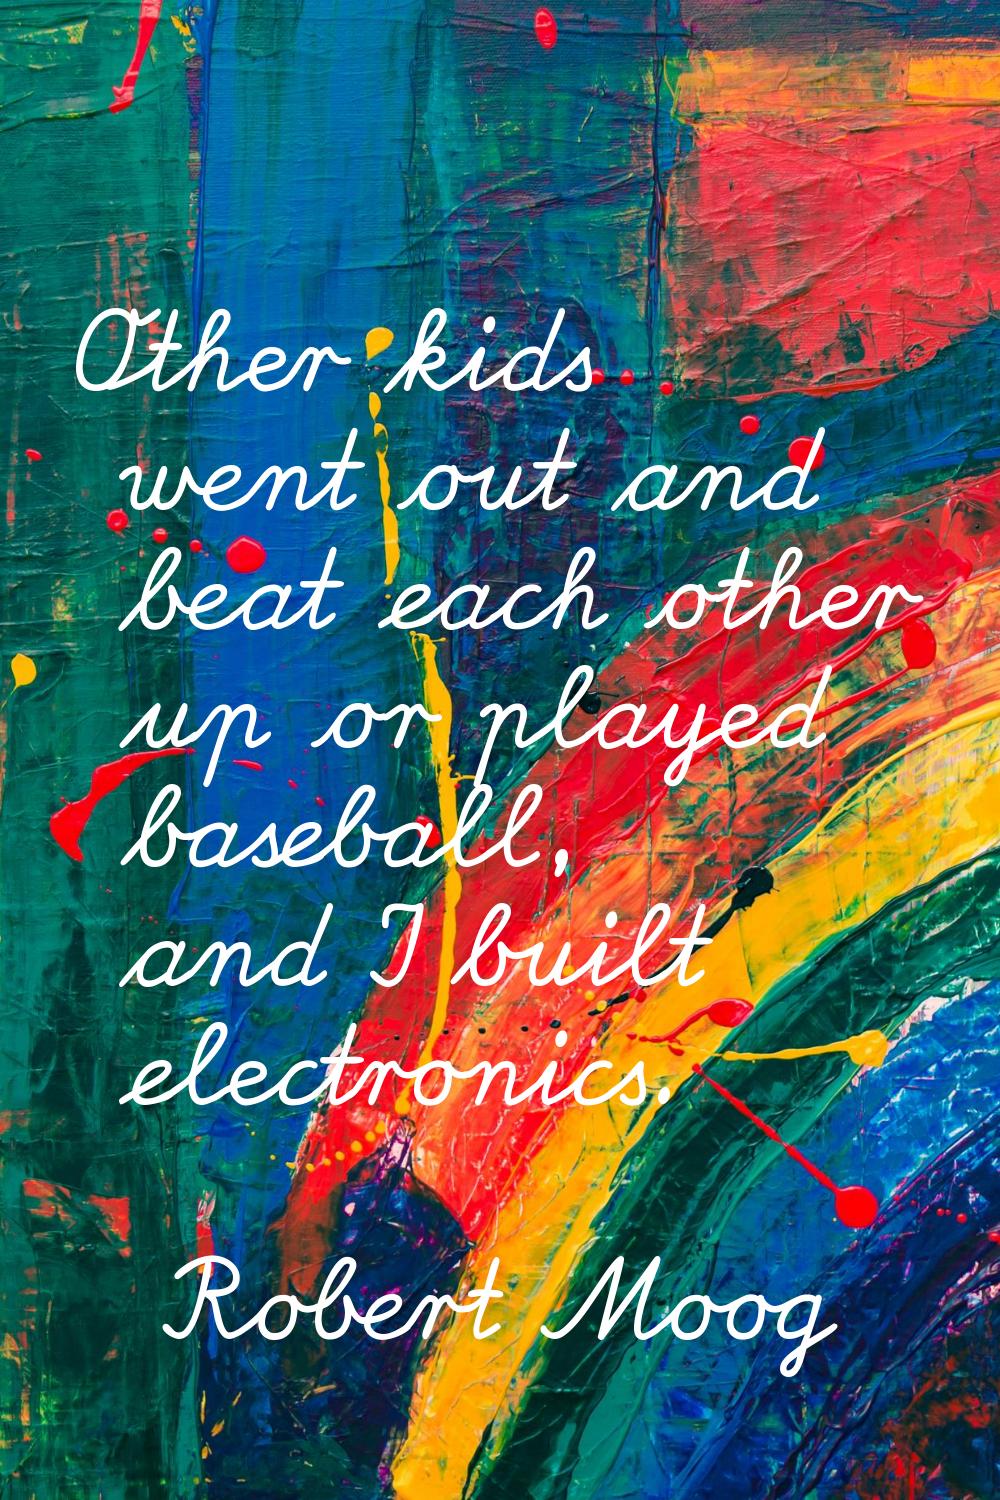 Other kids went out and beat each other up or played baseball, and I built electronics.